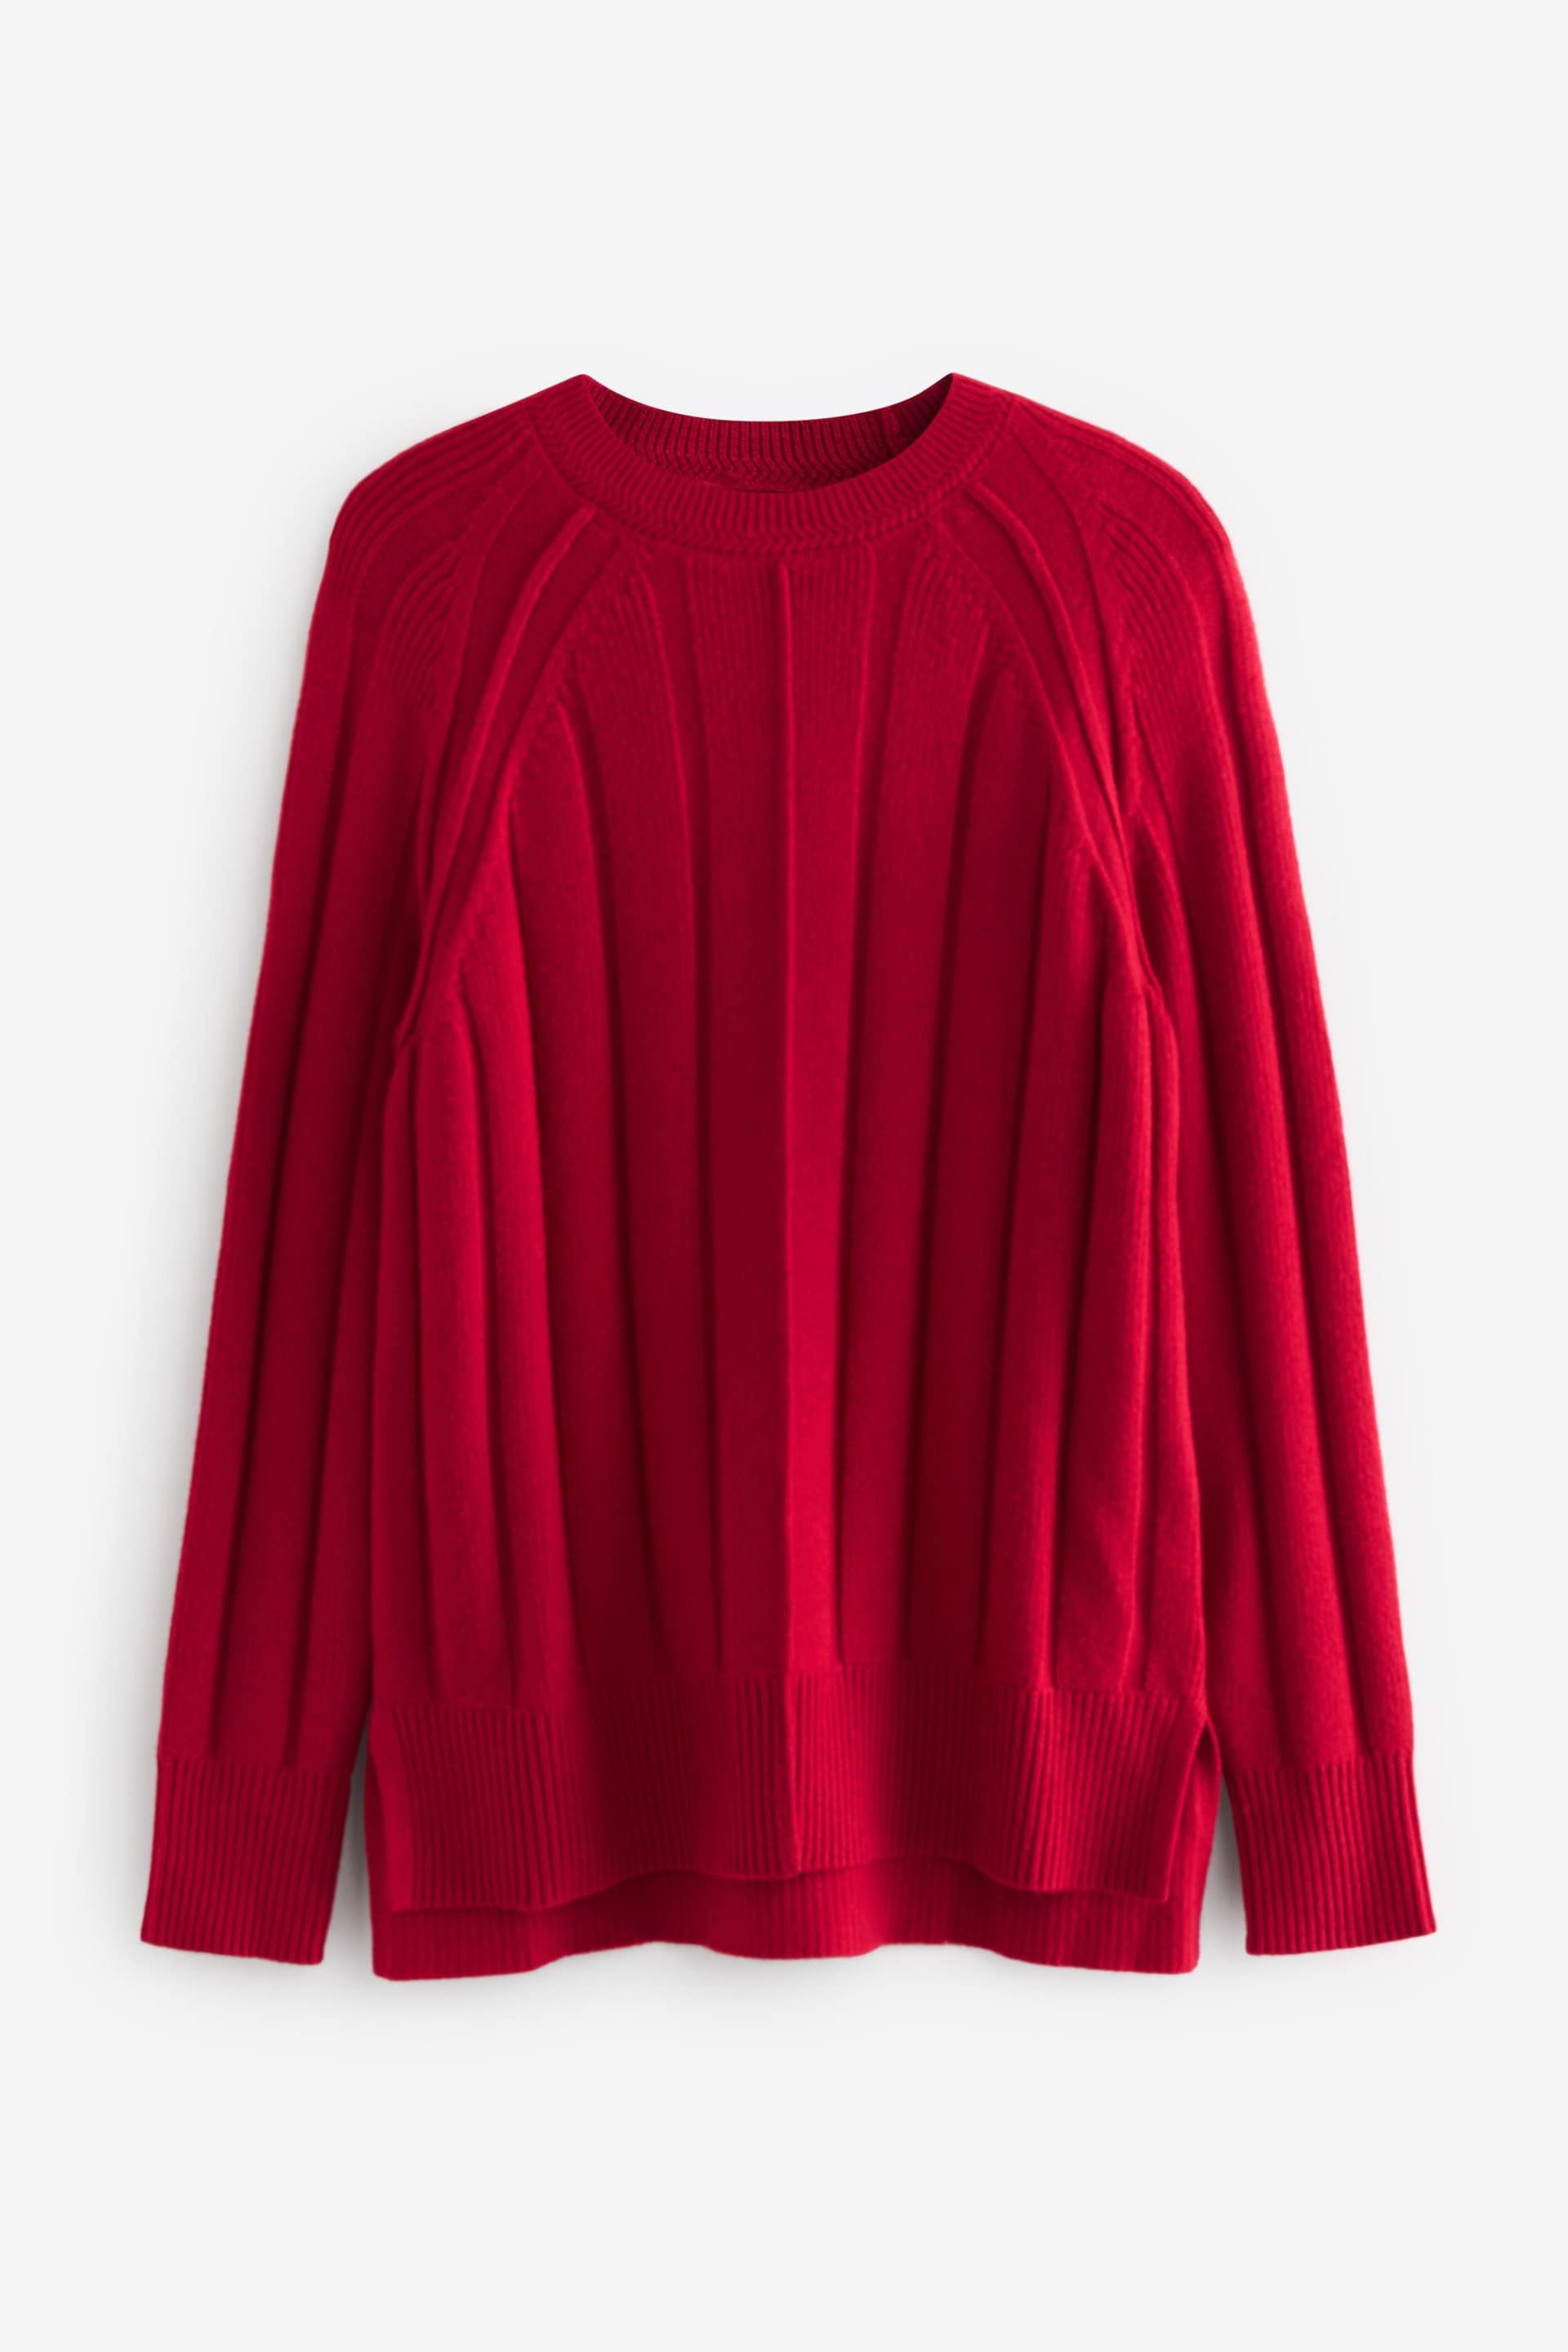 Red Ribbed Crew Neck Jumper - Image 6 of 7